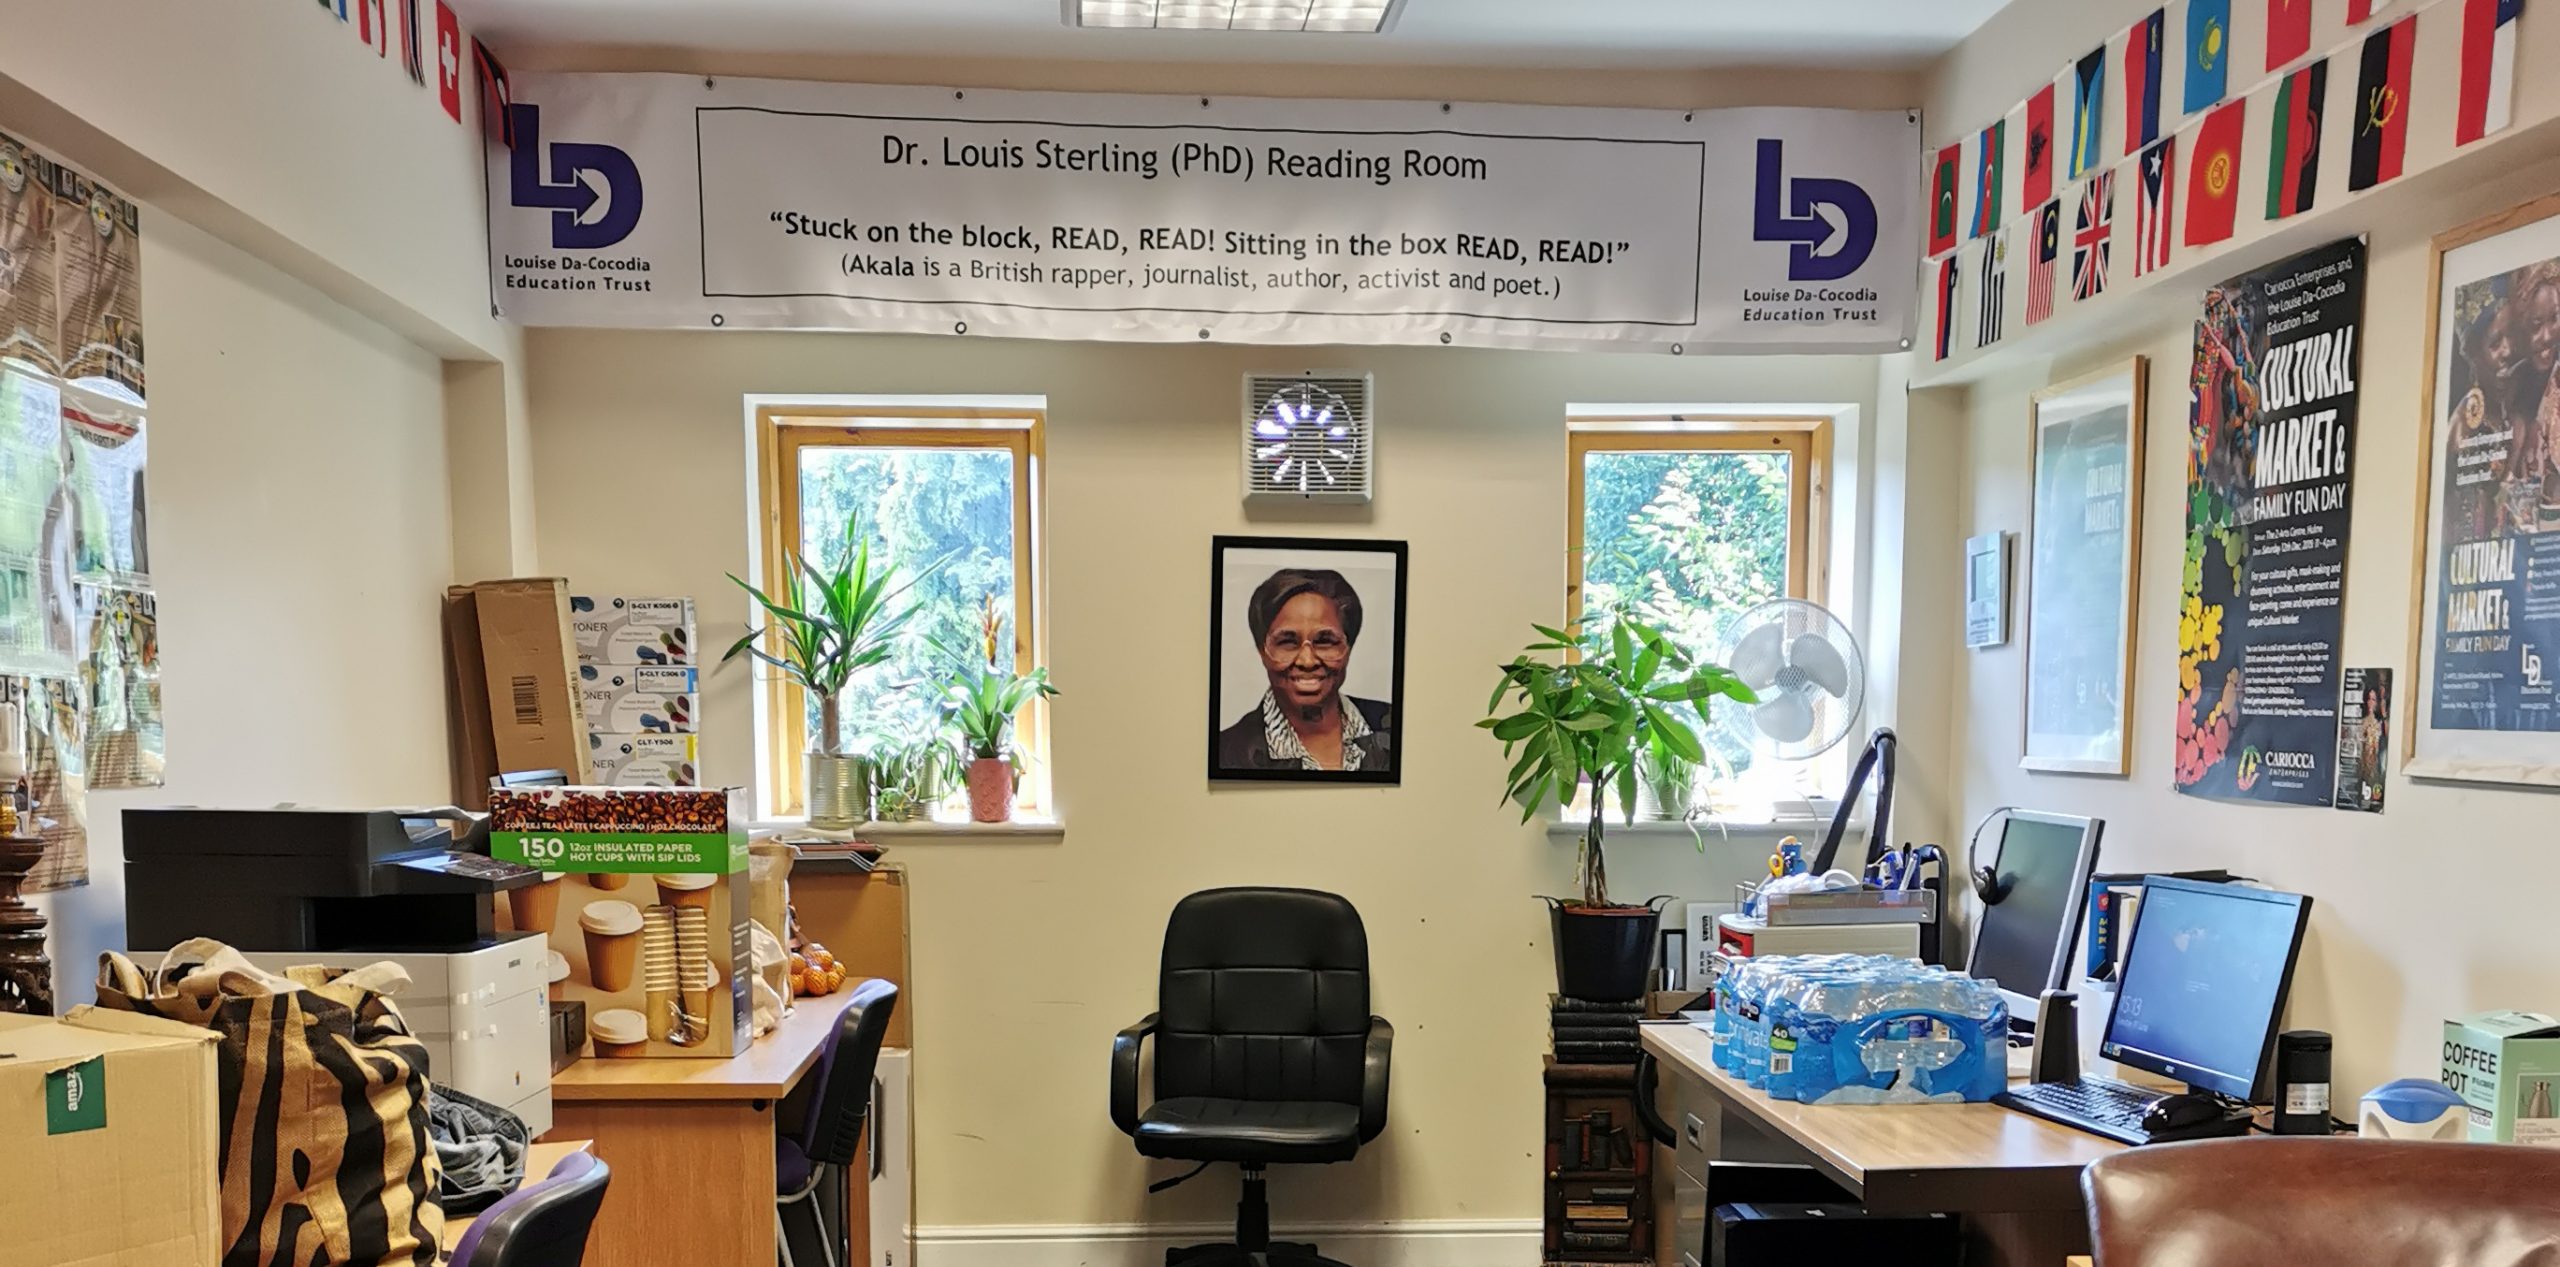 View of office space with desks on either side holding packeets of disposable cups and bottled water. There is a comfortable office chair against the end wall, which has two windows holding plant pots. Between them is a photograph of Louise Da-Cocodia. At the top of the wall is a banner reading Dr Louis Sterling PHD Reading Room "Stuck on the block, read, read. Sitting in the box, read, read." (Akala is a British rapper, journalist, author, activist and poet)